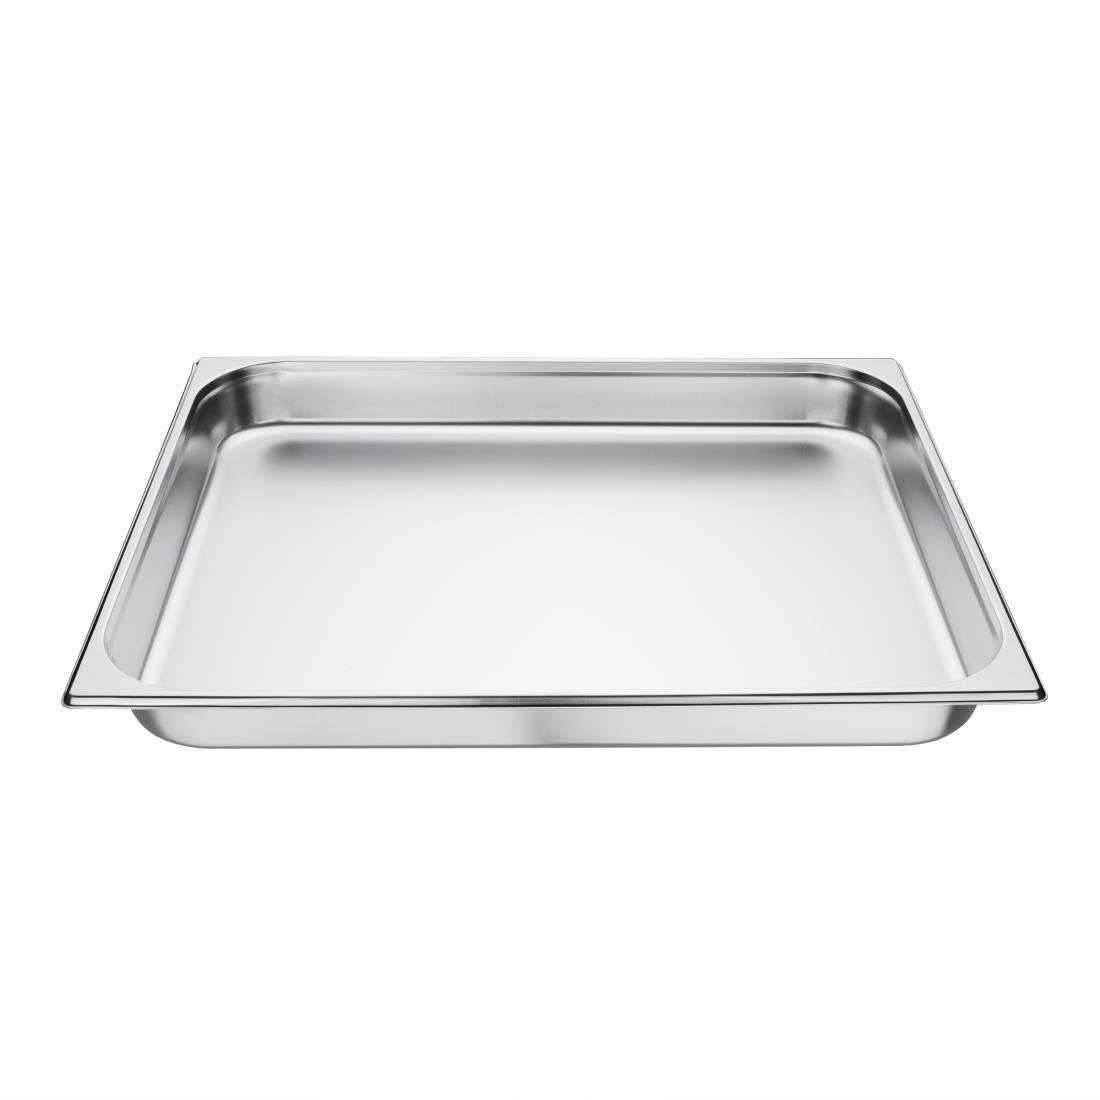 Vogue Stainless Steel 2/1 Gastronorm Pan 65mm - K802  - 2